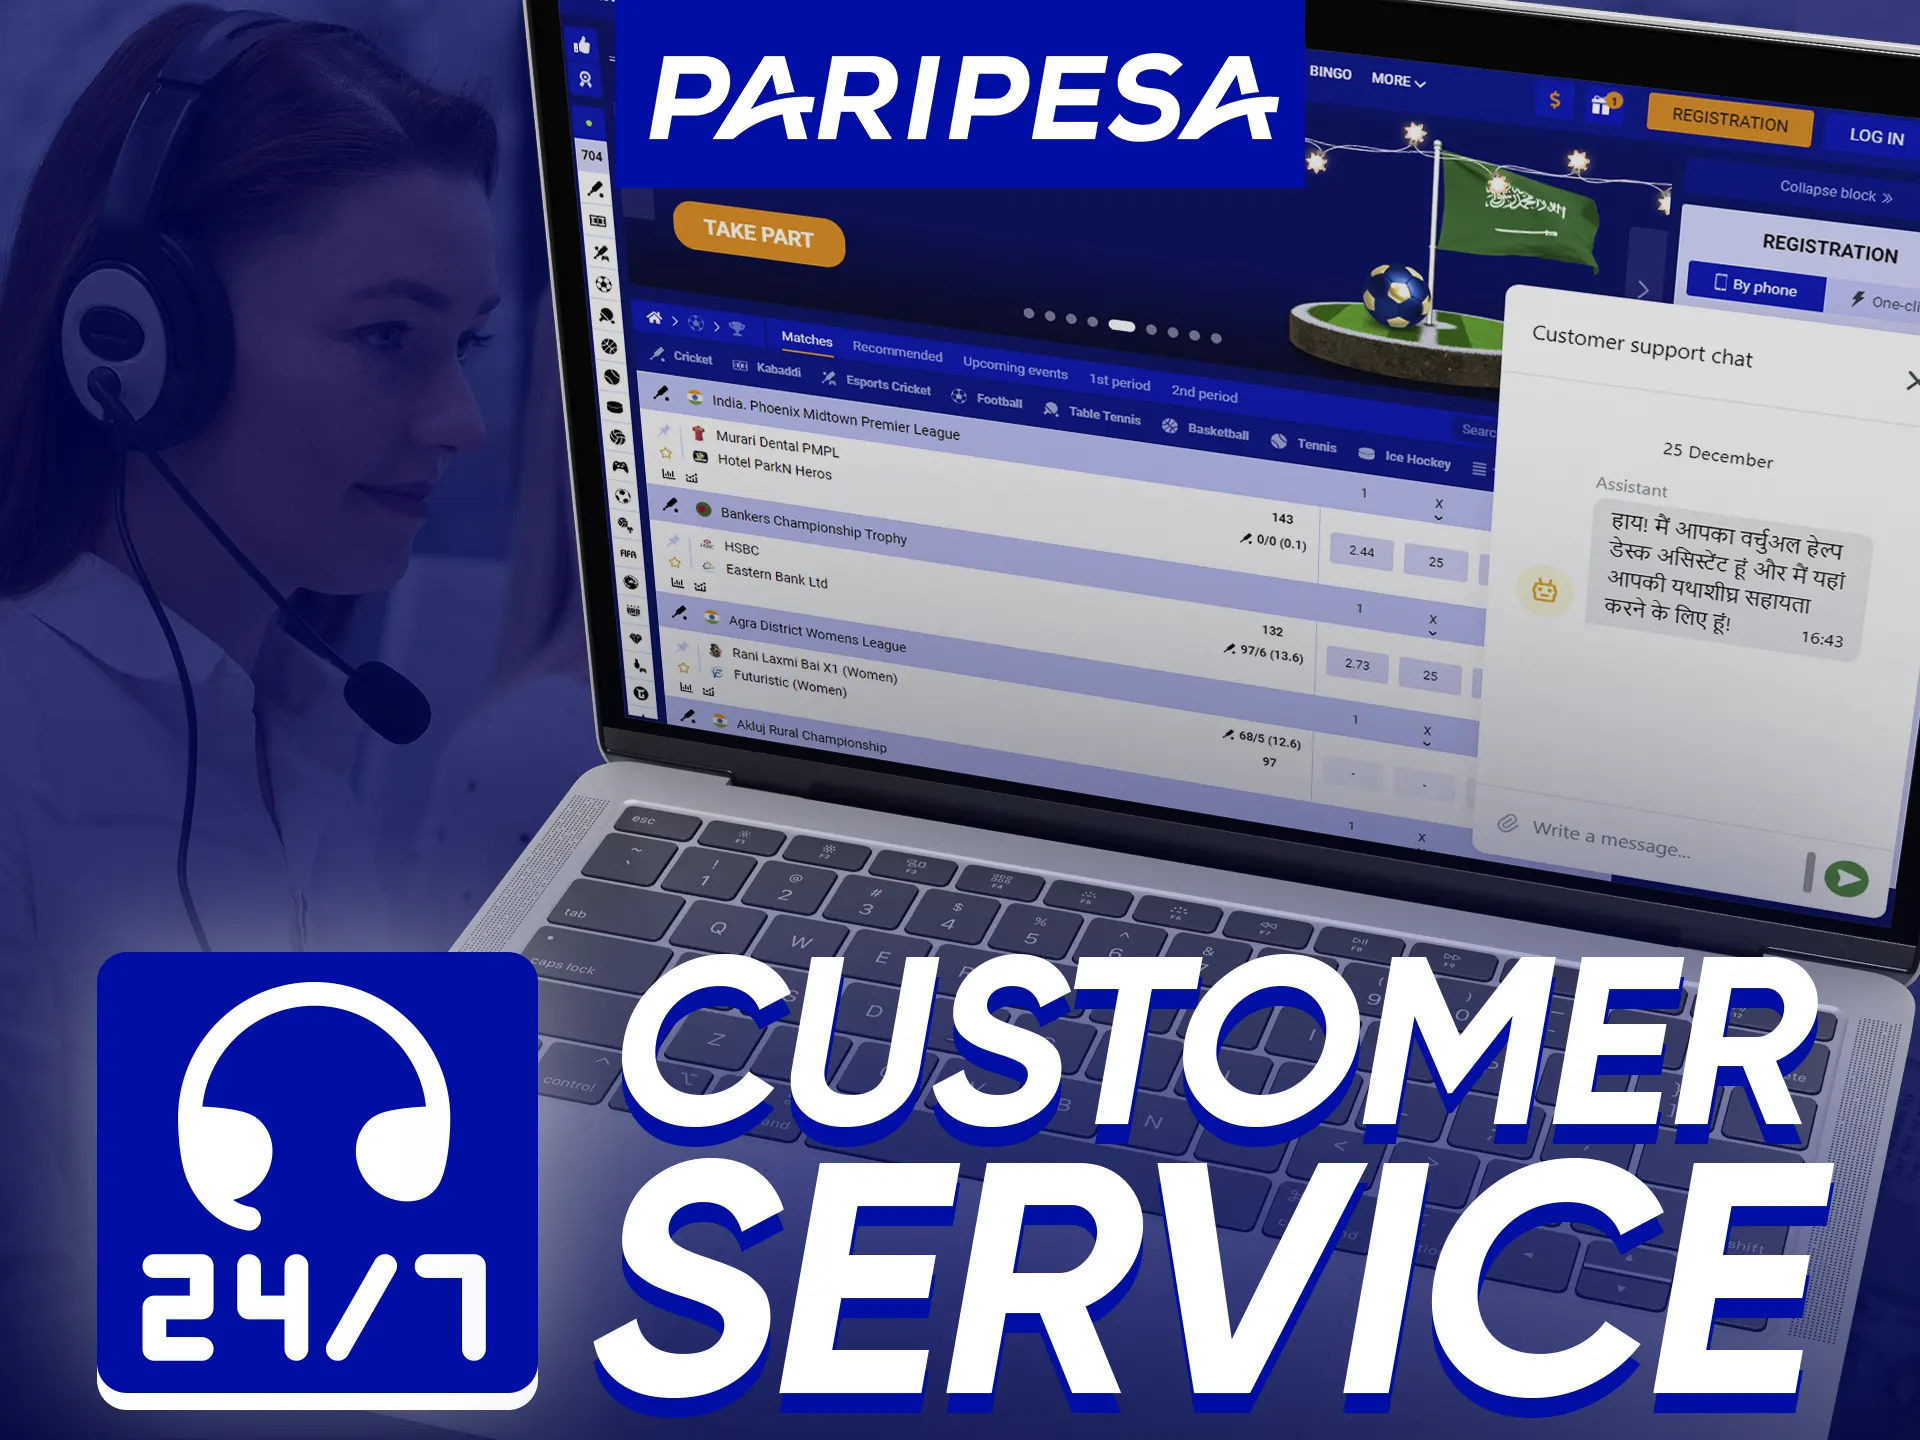 Paripesa Customer Service provides assistance through email and online chat.